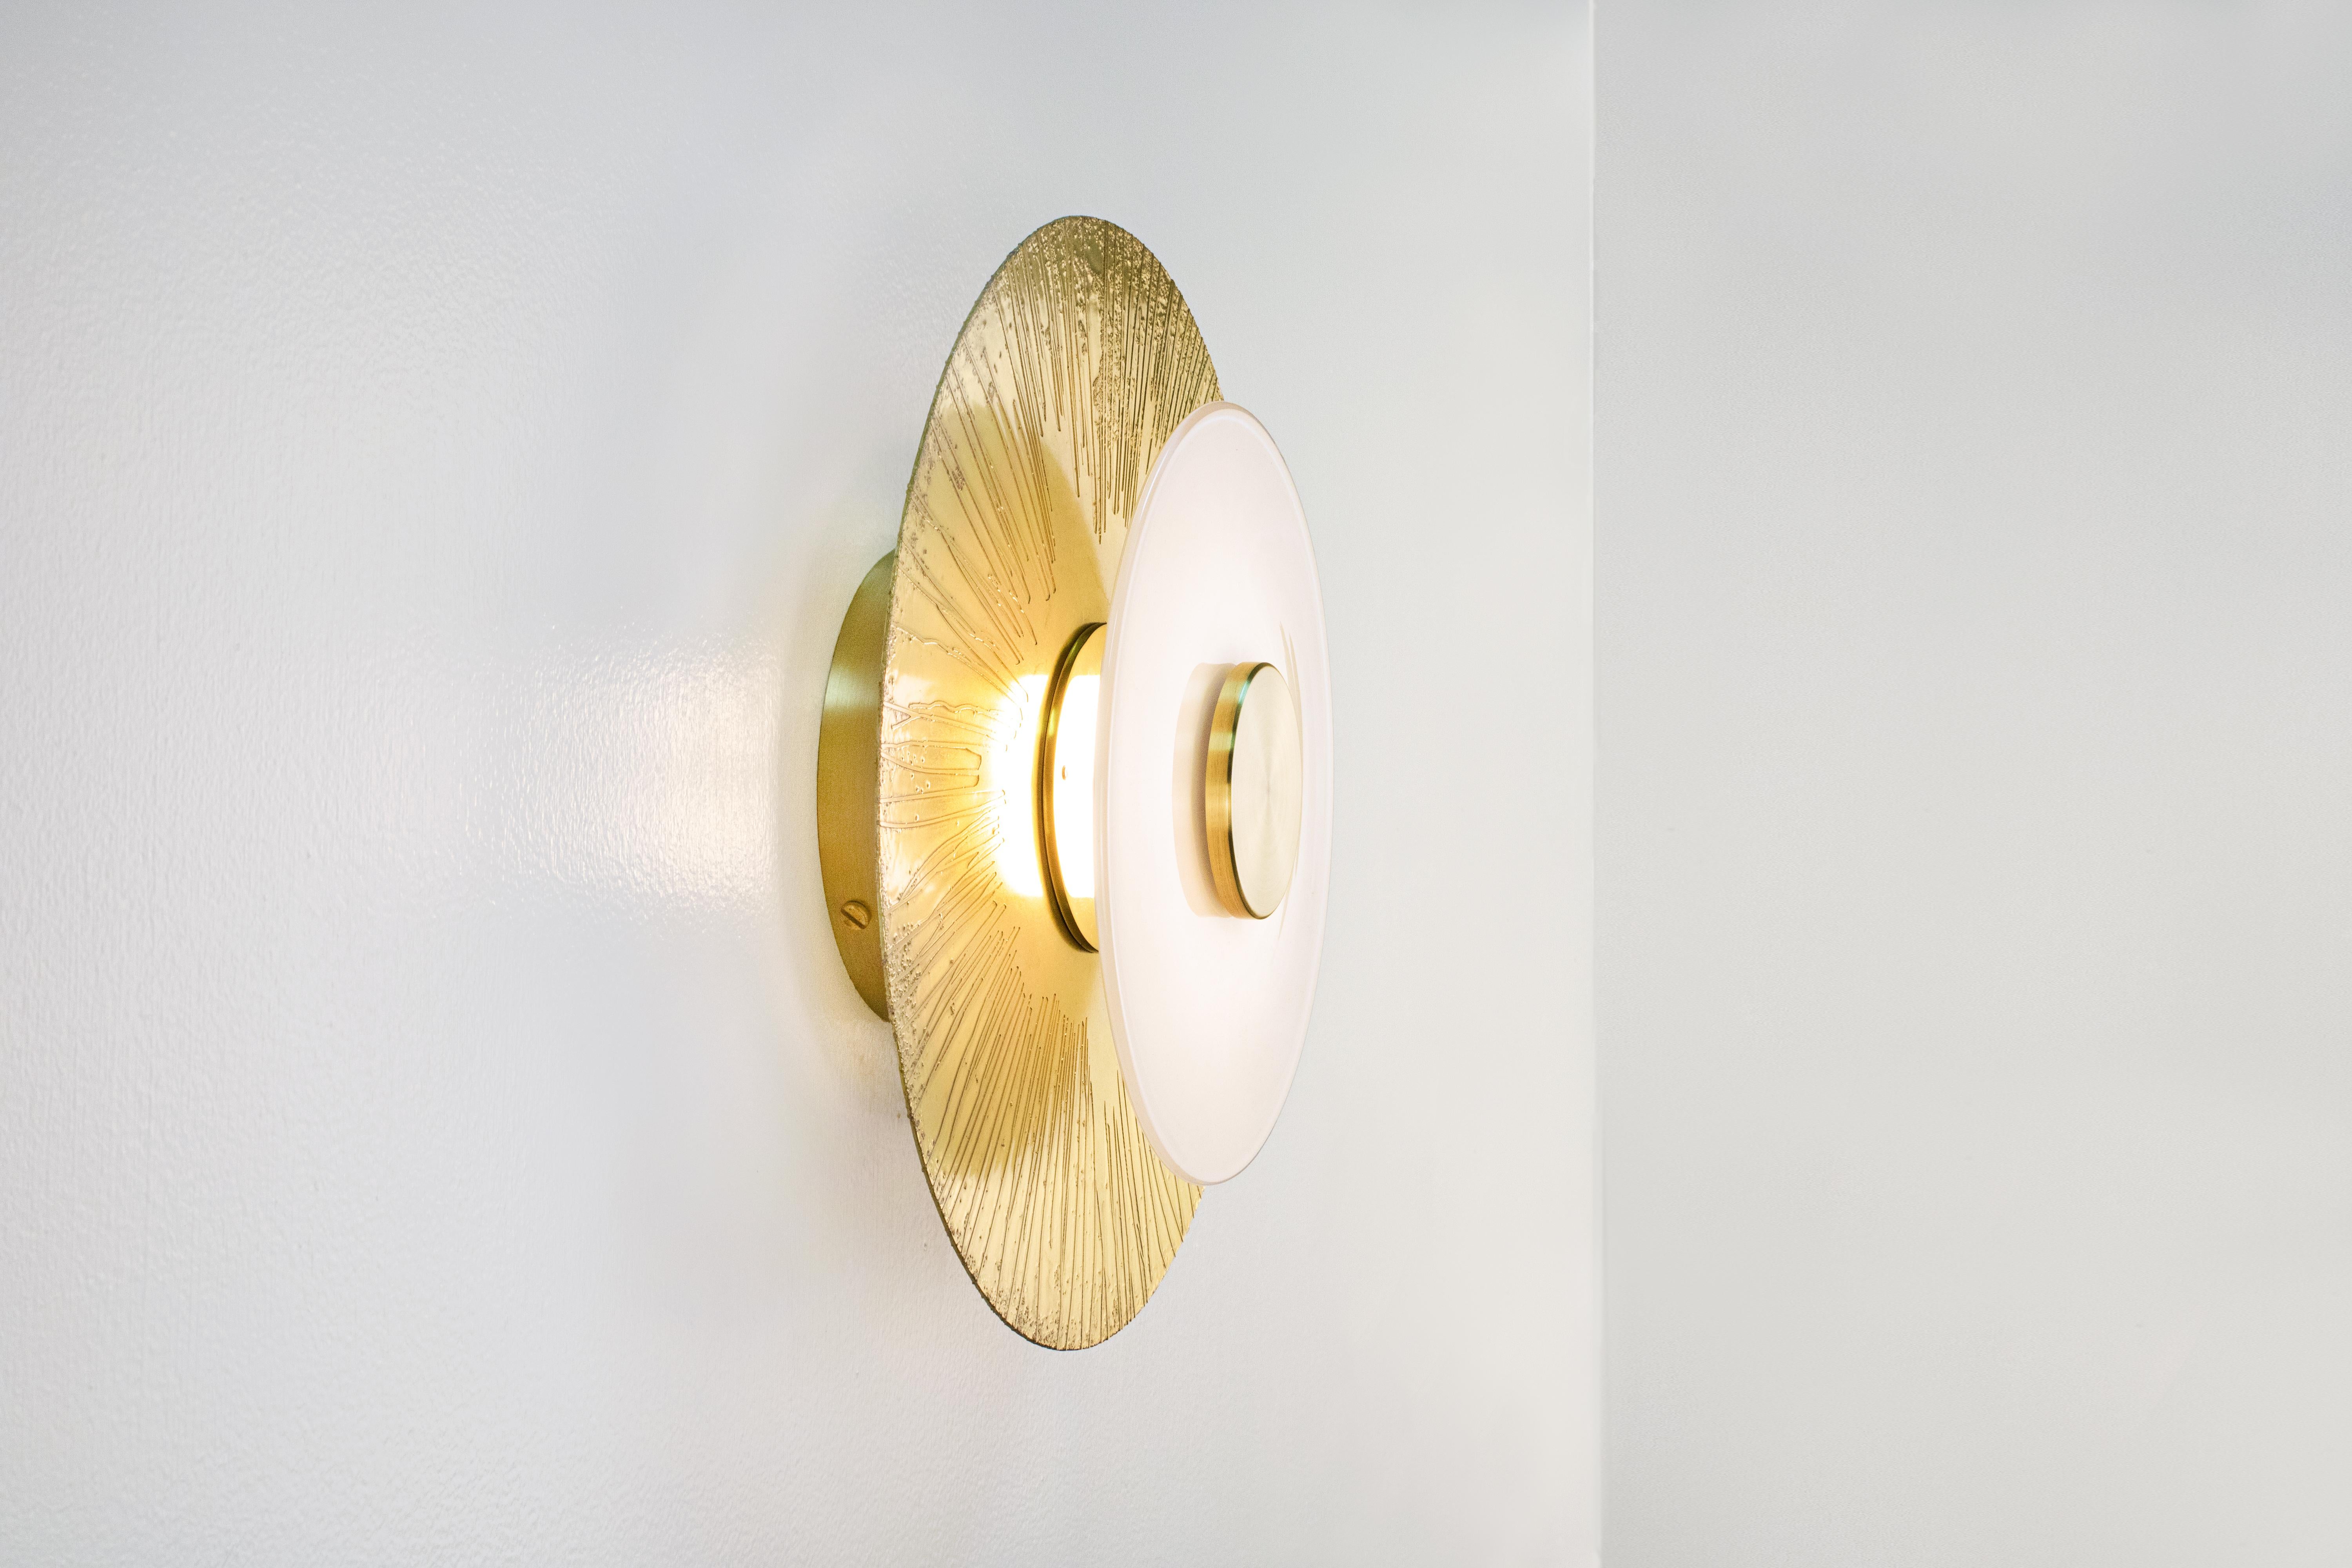 American Klein Sconce in Etched and Polished Brass with White Glass Rondelle For Sale